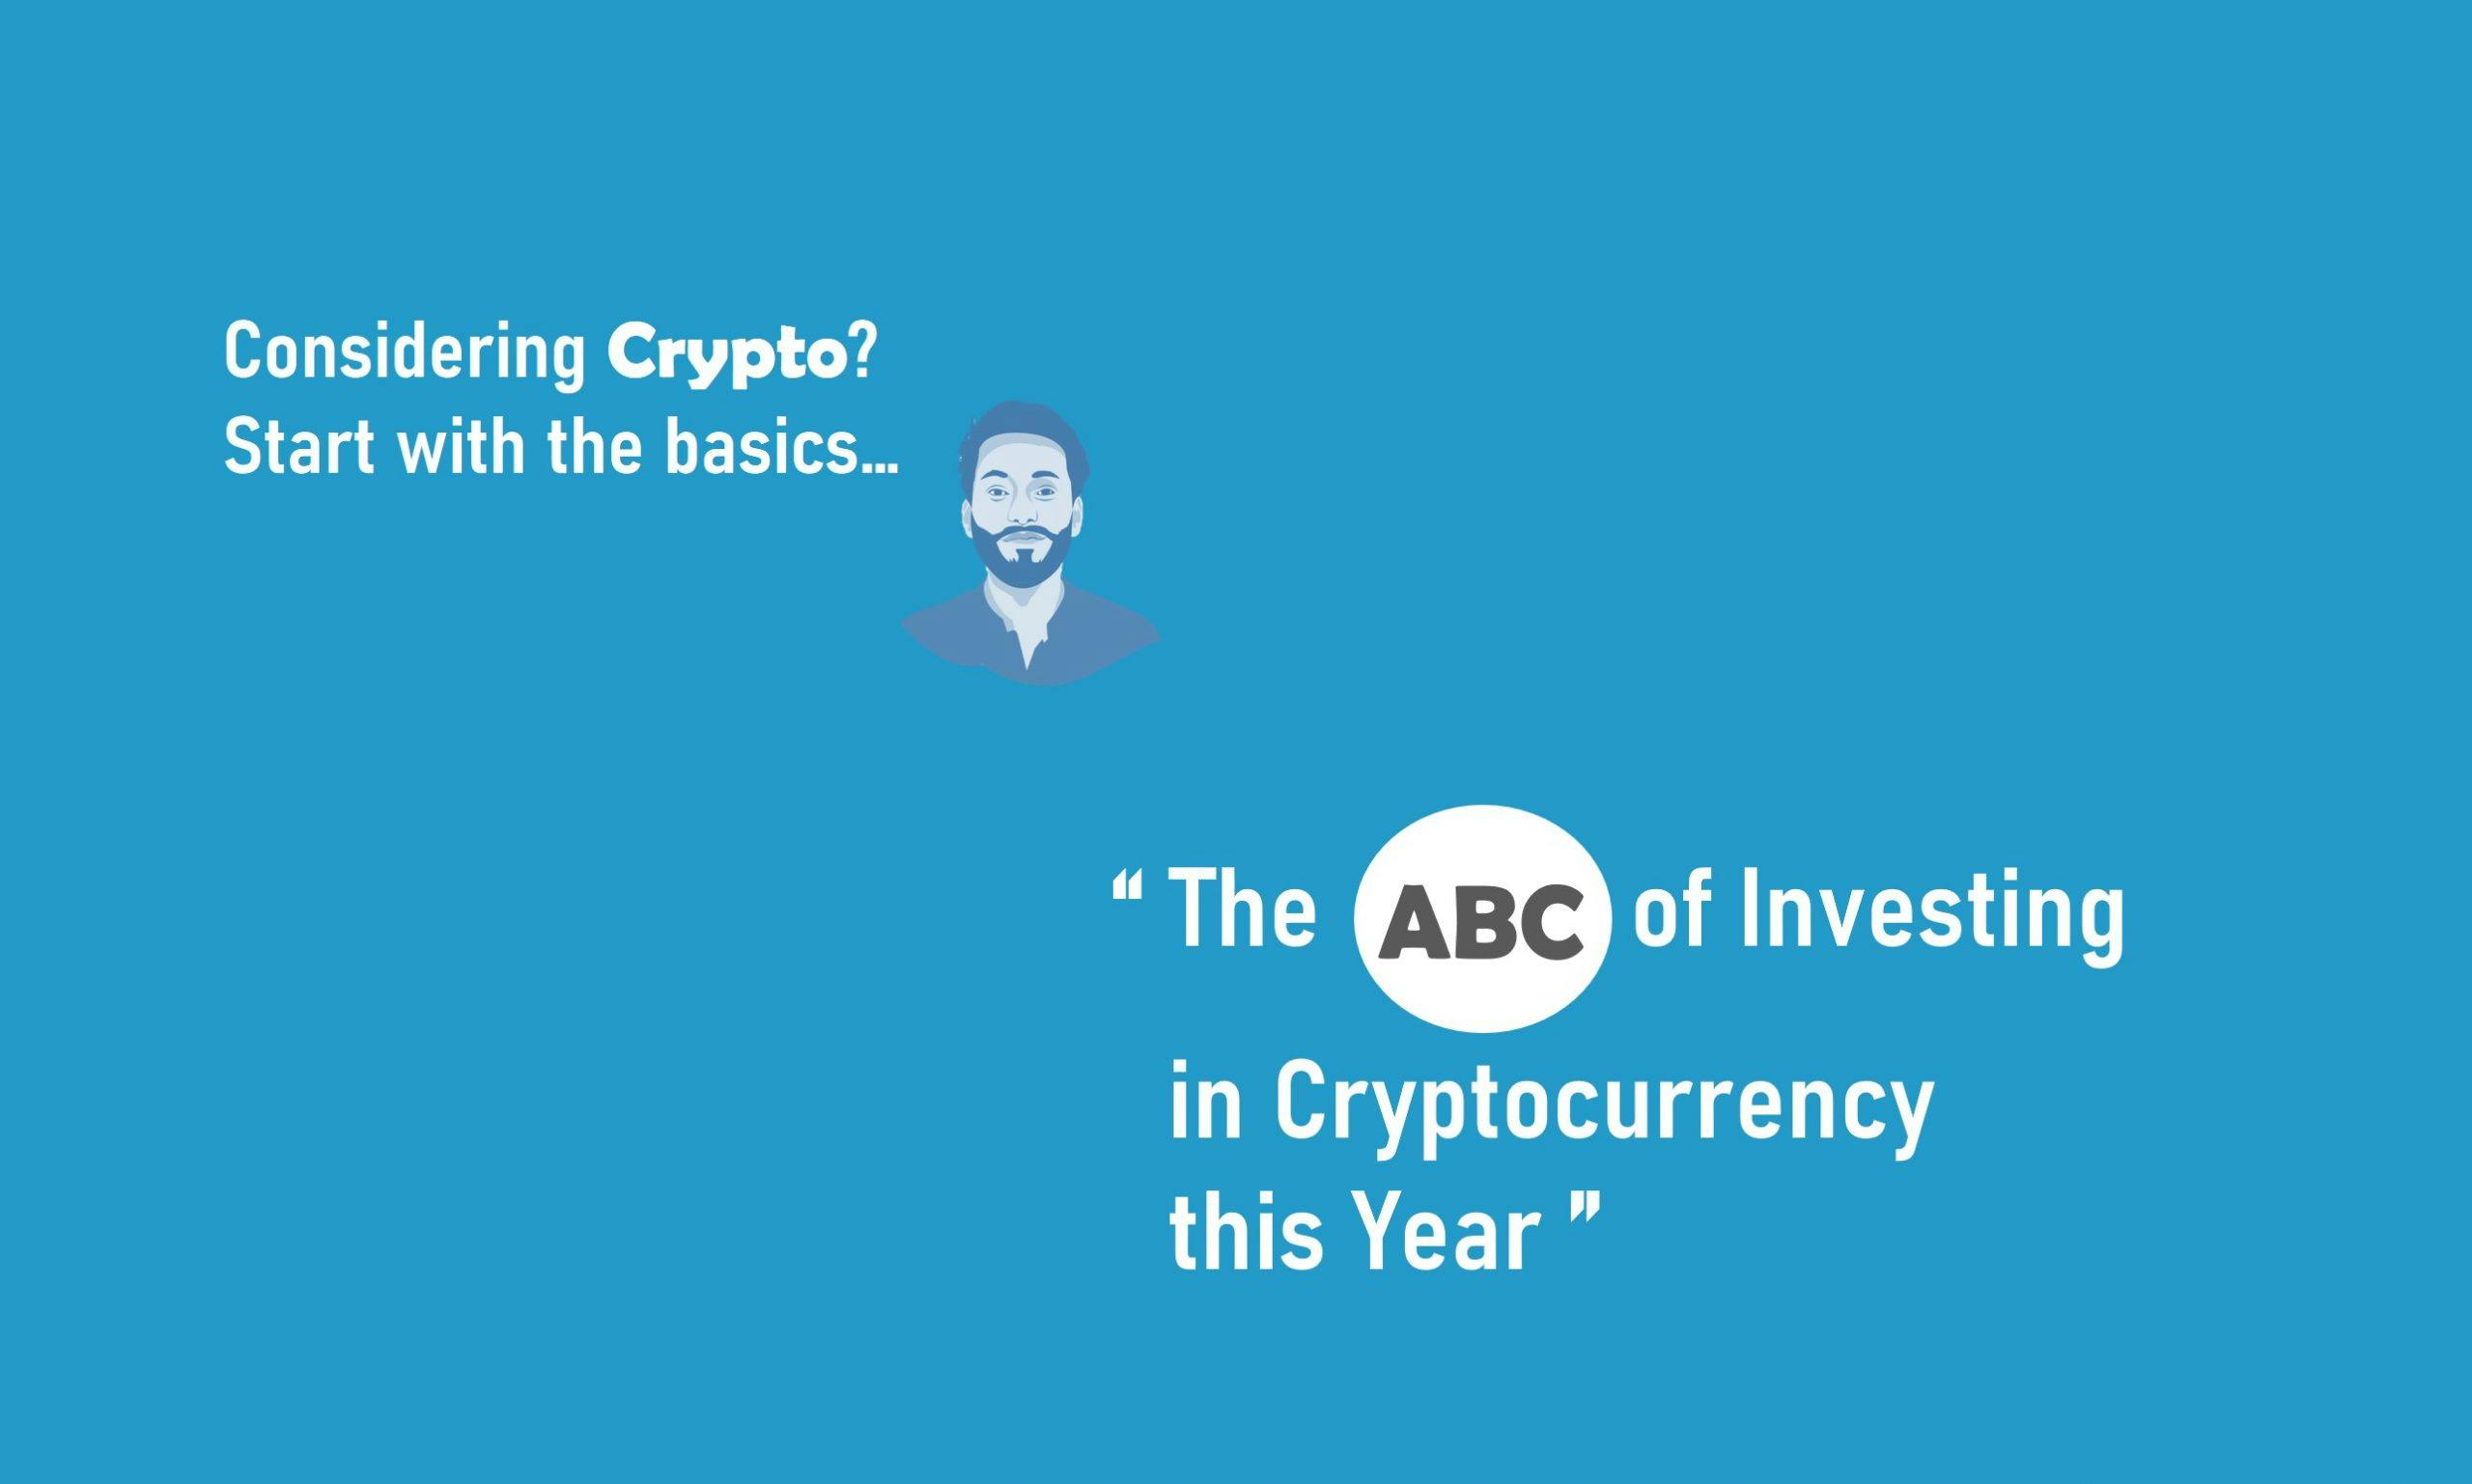 The ABC of Investing in Cryptocurrency this Year